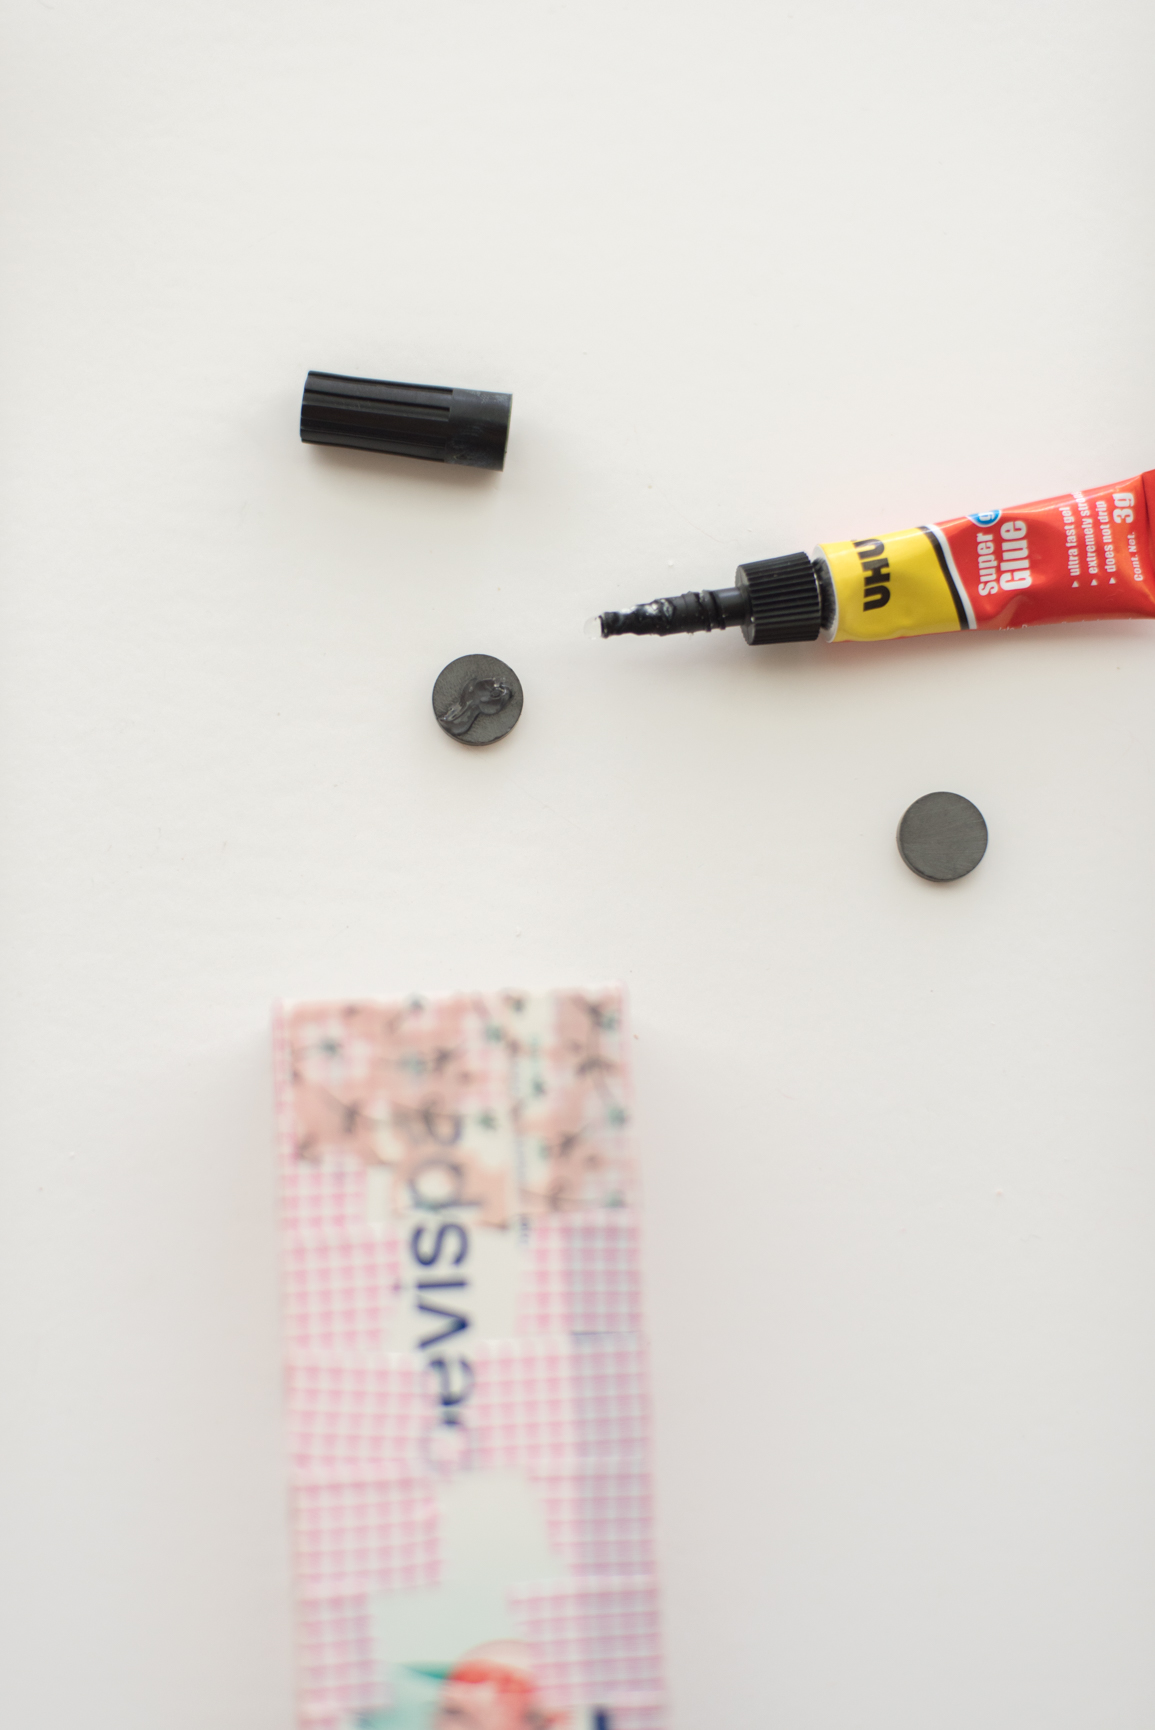 DIY How to make Magnetic Pen Holder for the Fridge by CGScreative (10 of 15).JPG